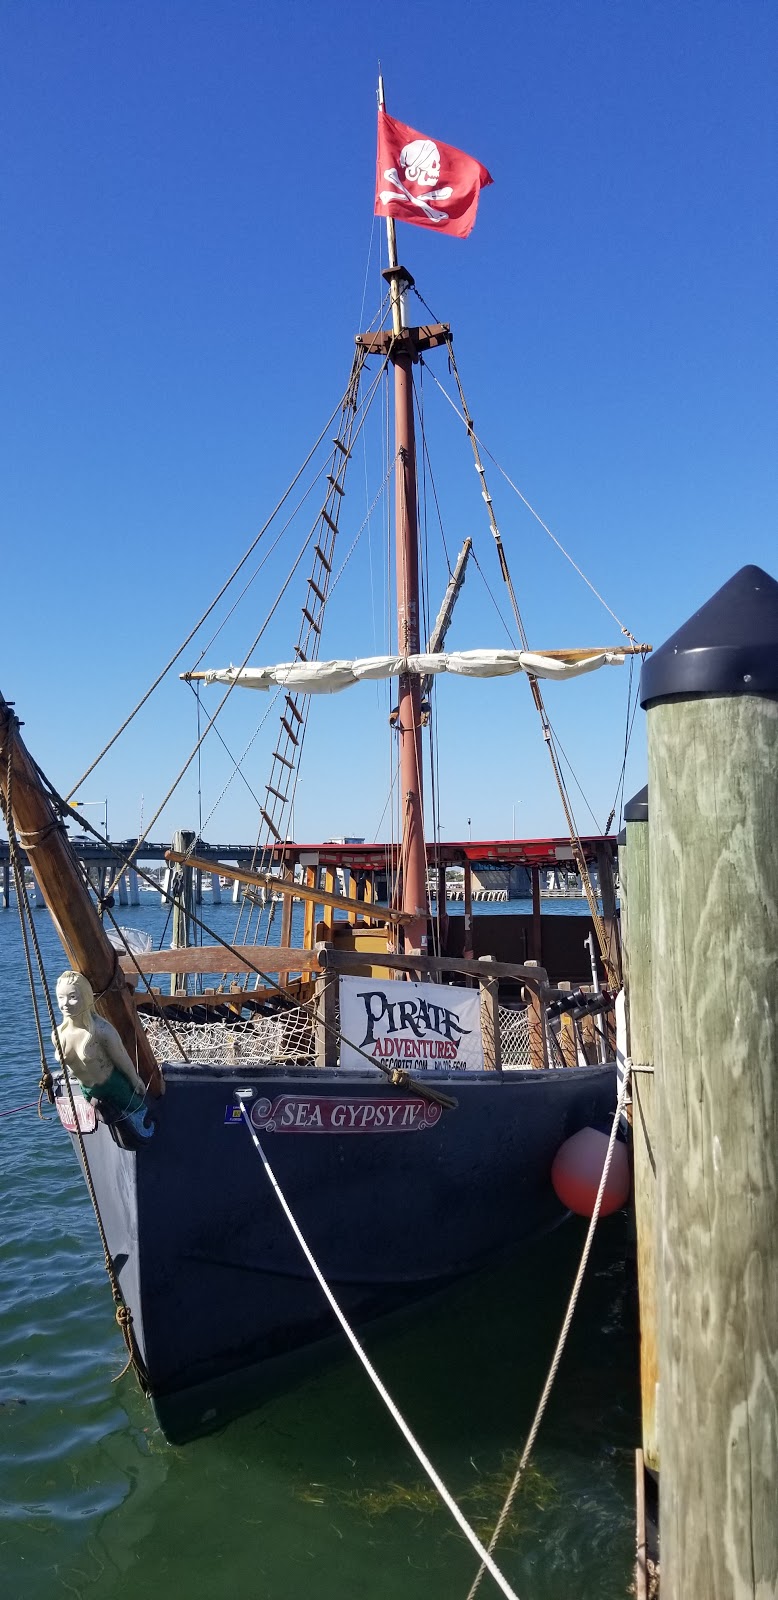 Pirate Adventures of Cortez | The Seafood Shack Marina, 4110 127th St W, Cortez, FL 34215 | Phone: (941) 226-5640